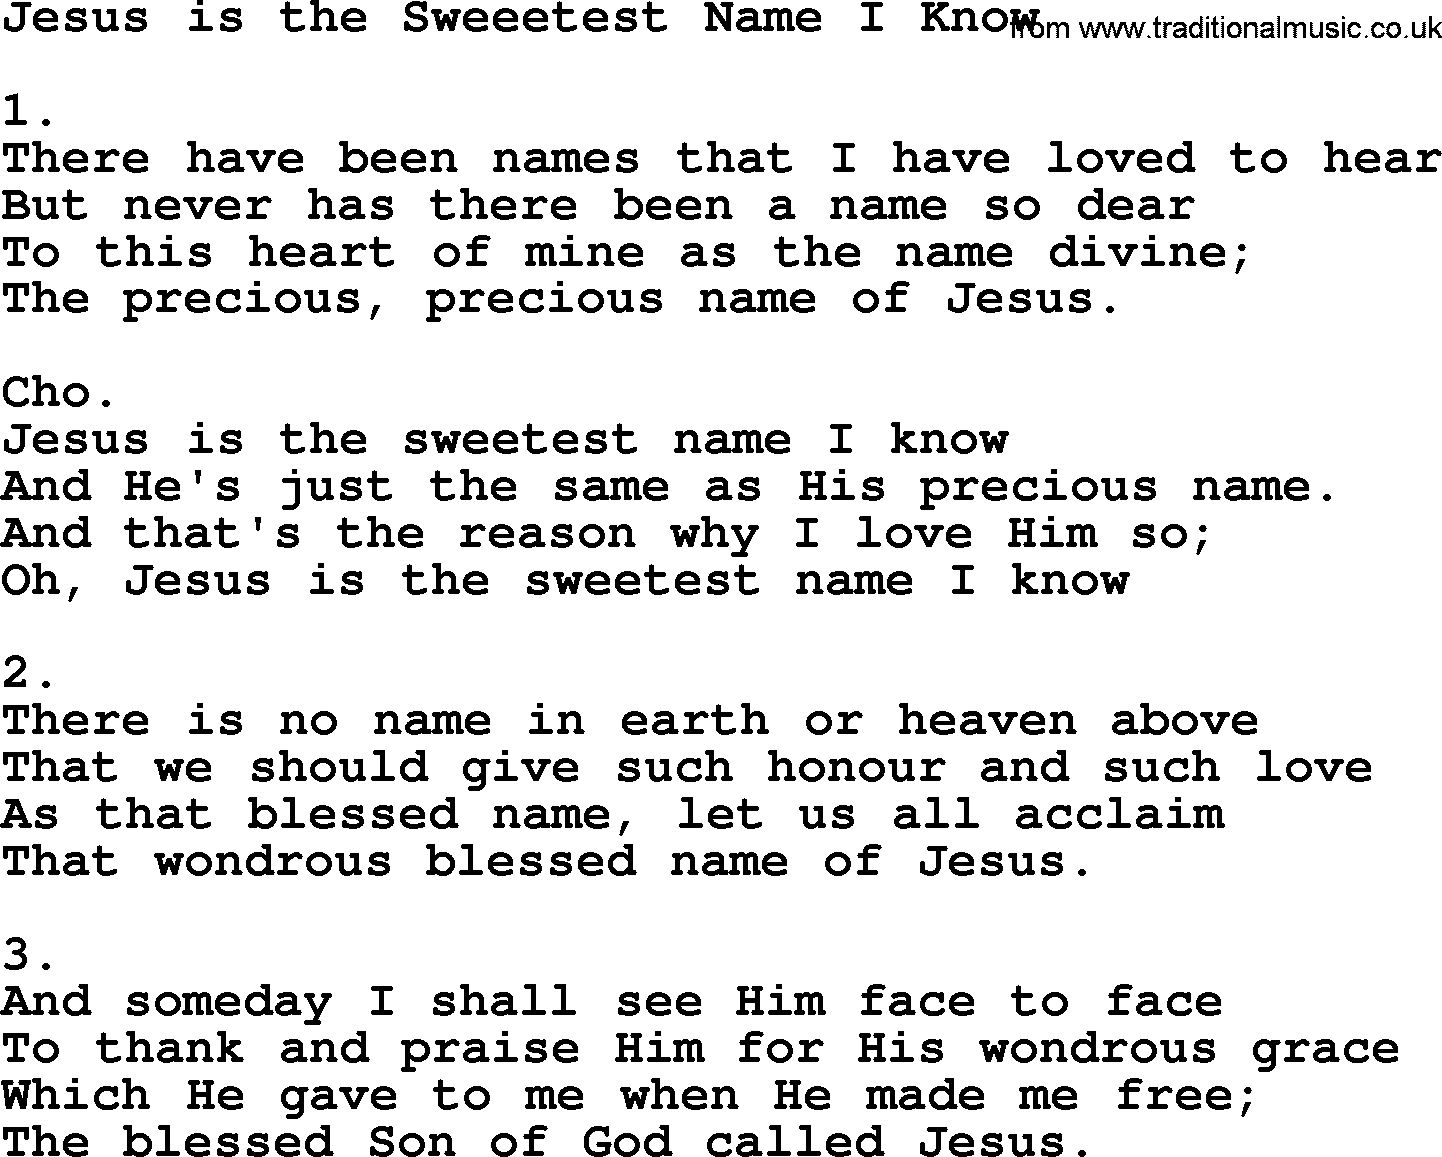 Apostolic & Pentecostal Hymns and Songs, Hymn: Jesus is the Sweeetest Name I Know lyrics and PDF